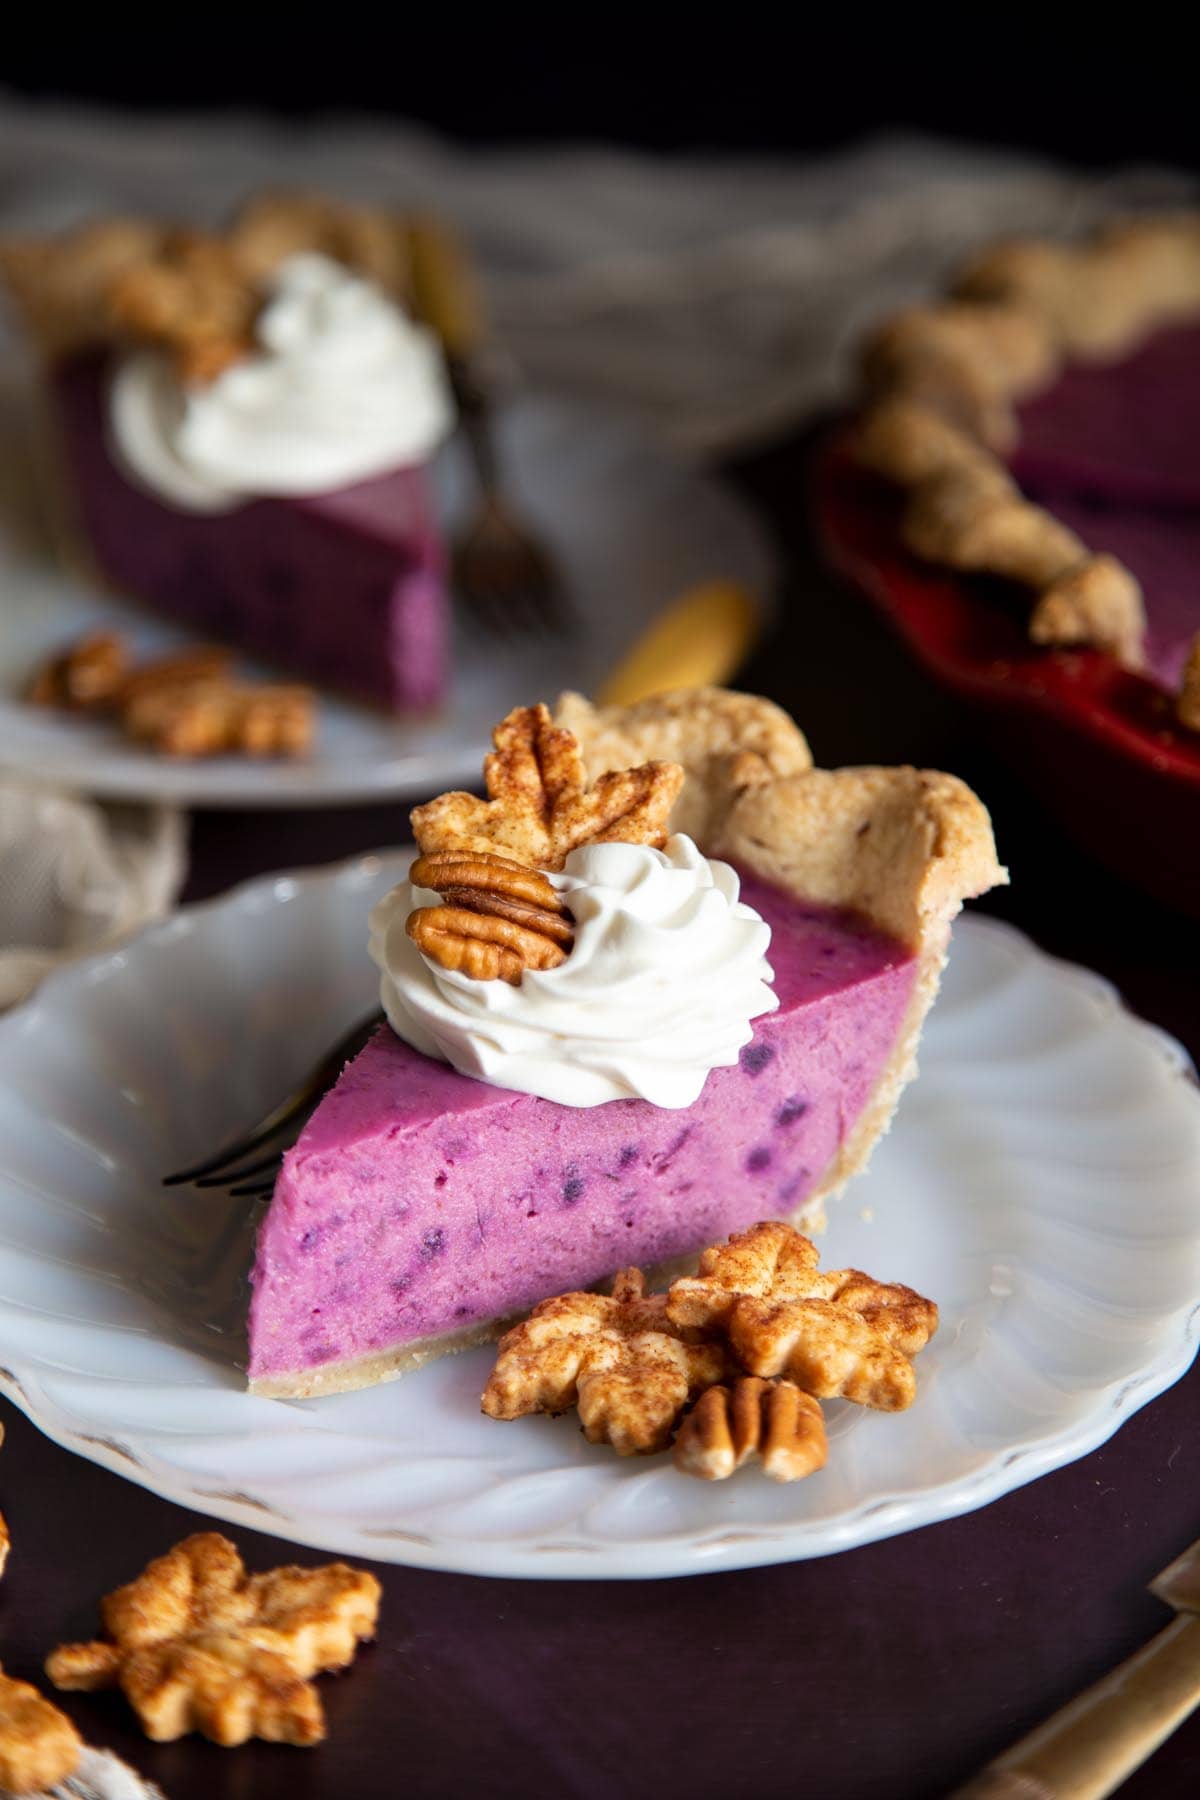 A slice of purple sweet potato pie on a plate with maple leaves cookies and pecans.